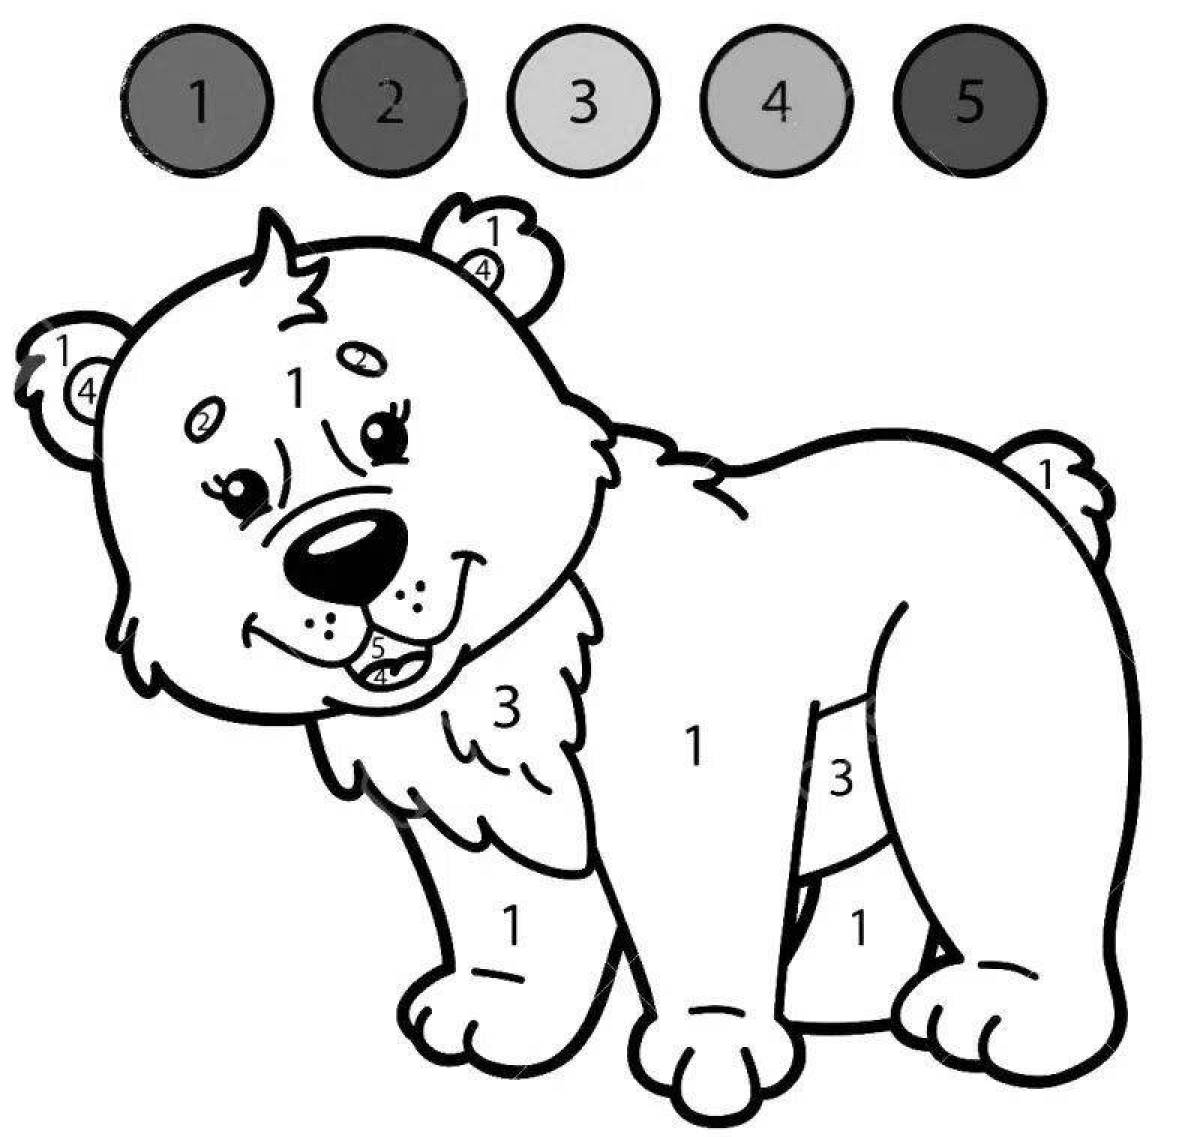 Color-fun show by numbers coloring page